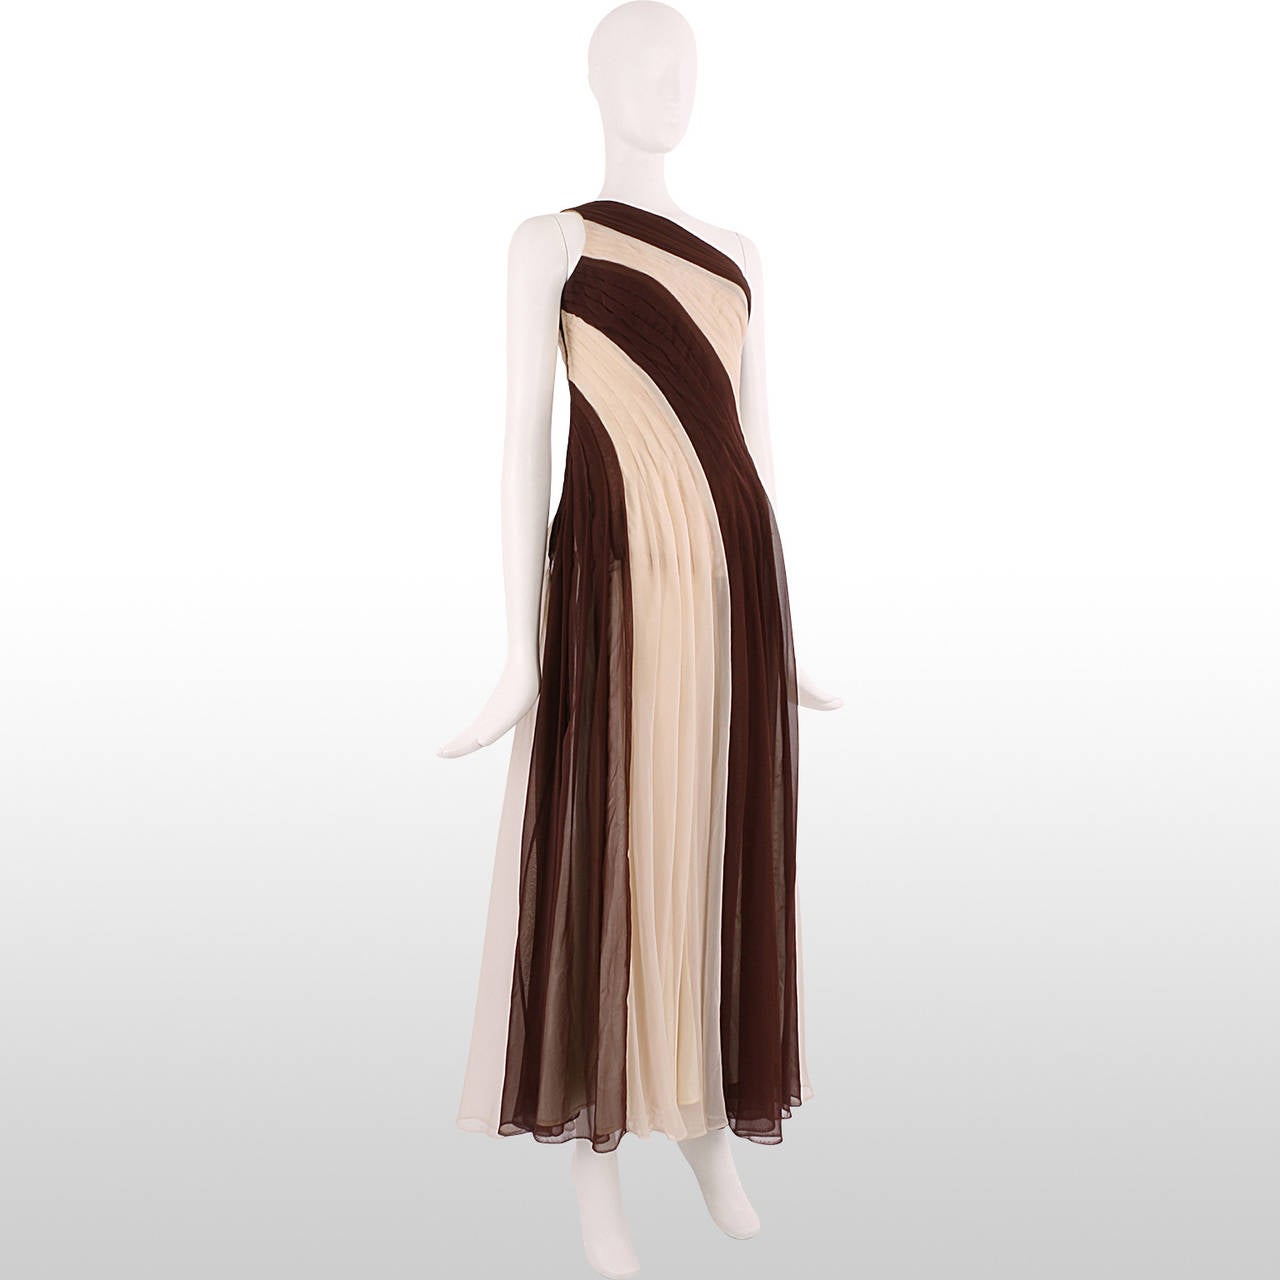 This fabulously elegant 1970's gown is made of alternating cocoa brown and ivory pleated chiffon that drapes from the asymmetric shoulder. The pleats form the structured bodice which then become loose at the waist to create a full flowing skirt. The